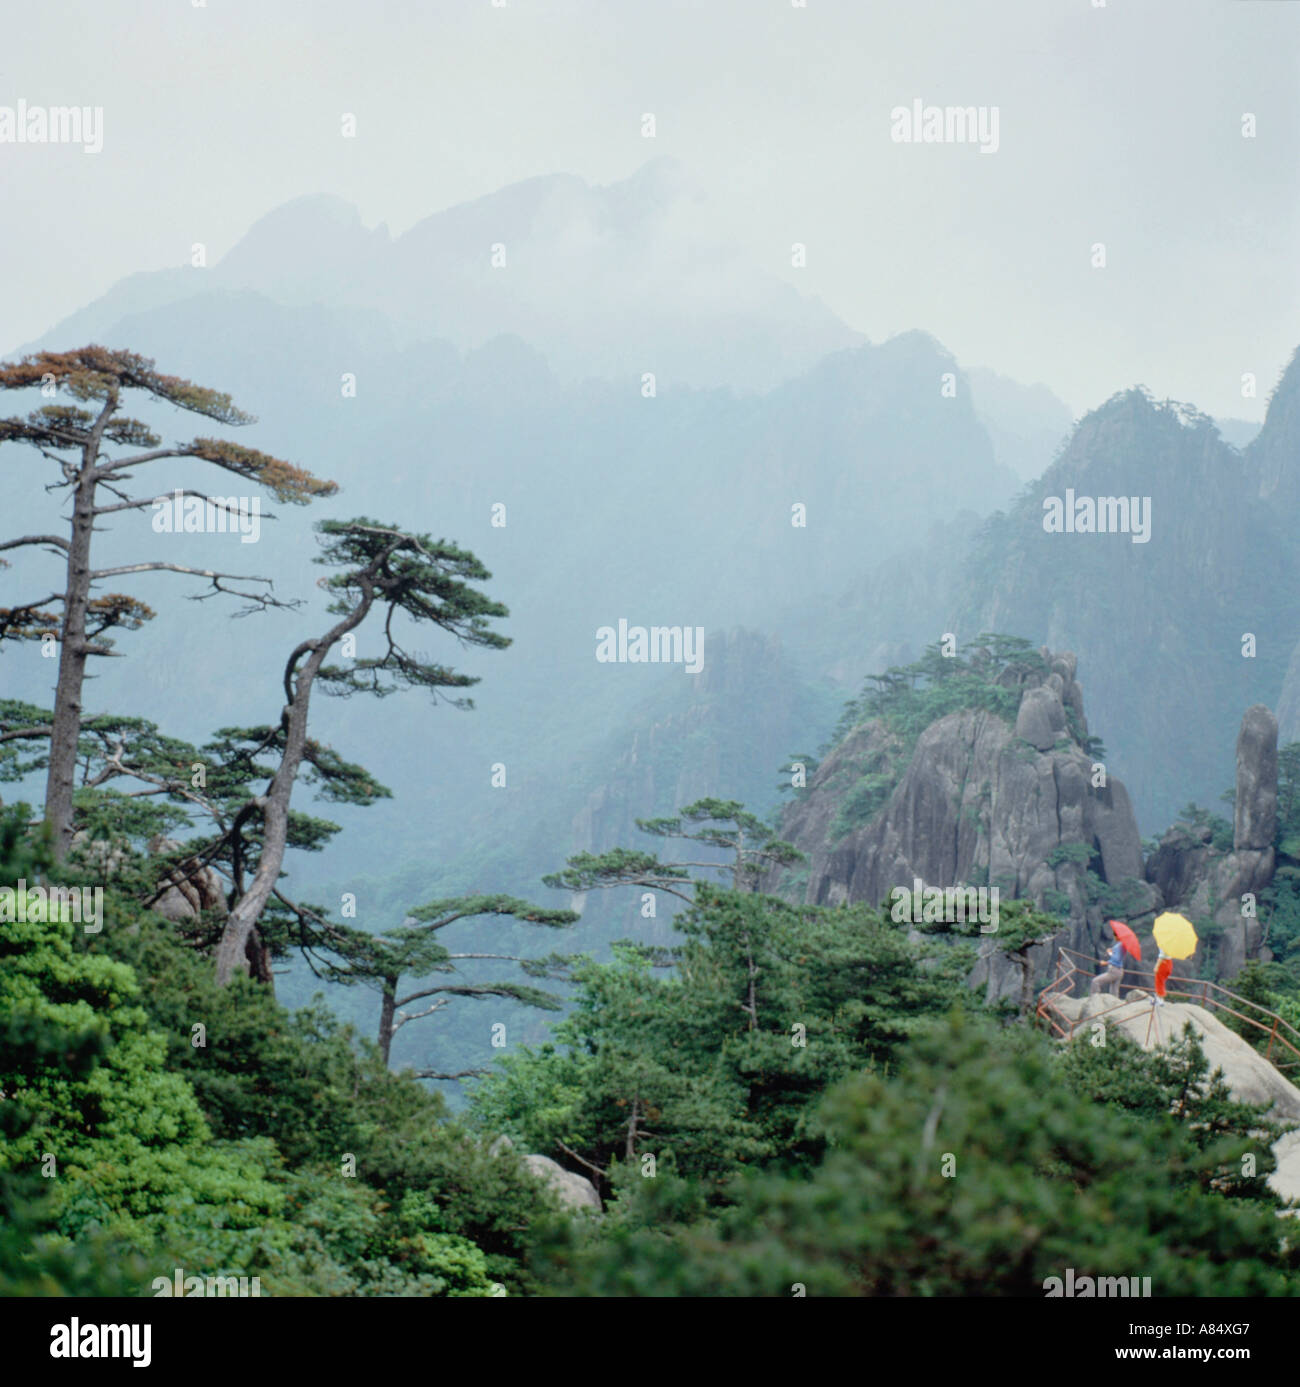 China. Huangshan mountains. Local people with Umbrellas. Stock Photo